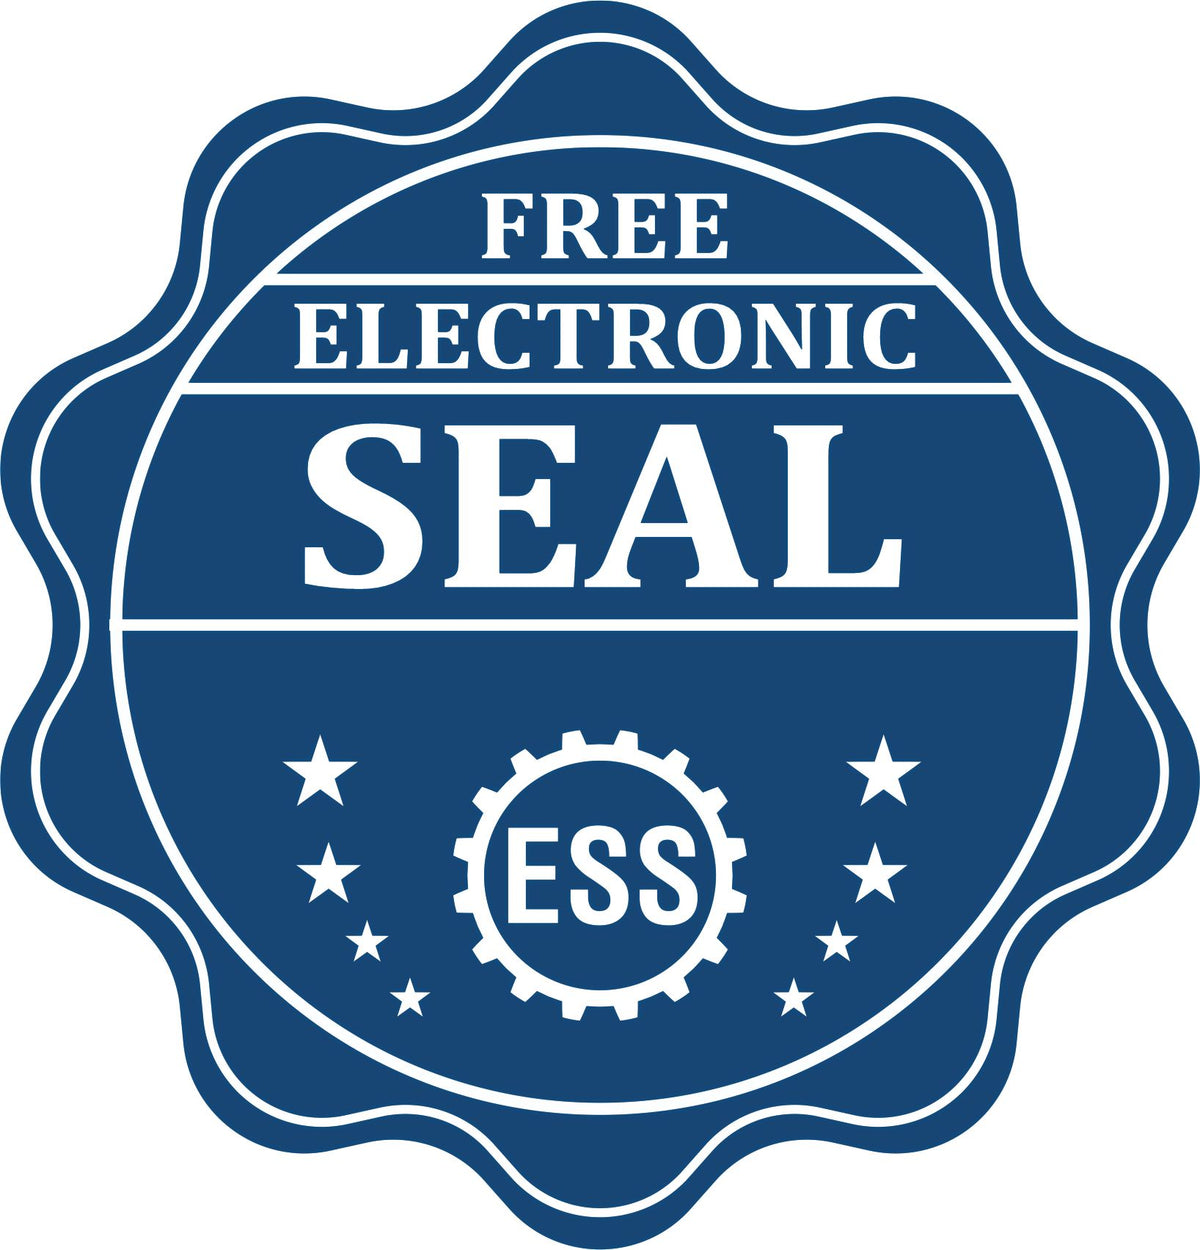 A badge showing a free electronic seal for the State of Louisiana Soft Land Surveyor Embossing Seal with stars and the ESS gear on the emblem.